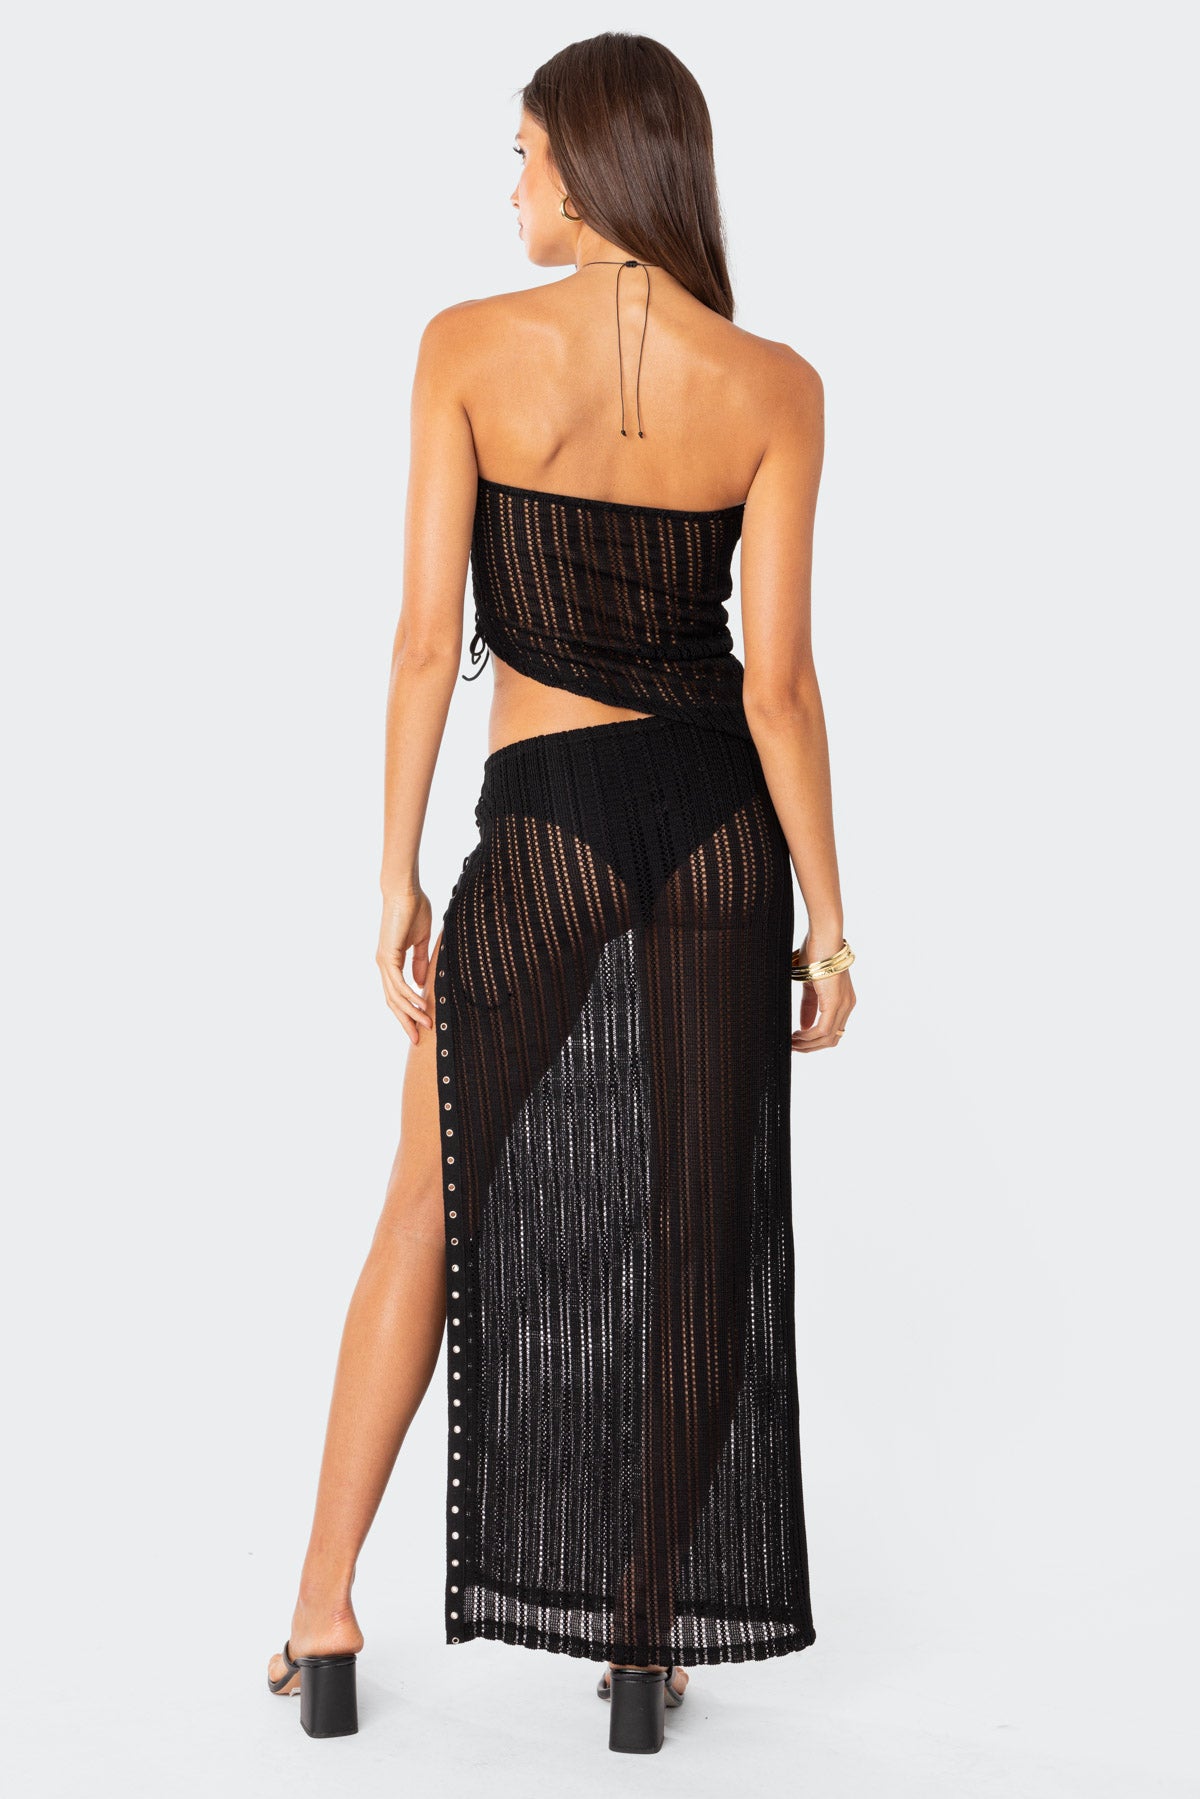 Lucea Lace Up Sheer Knit Maxi Skirt